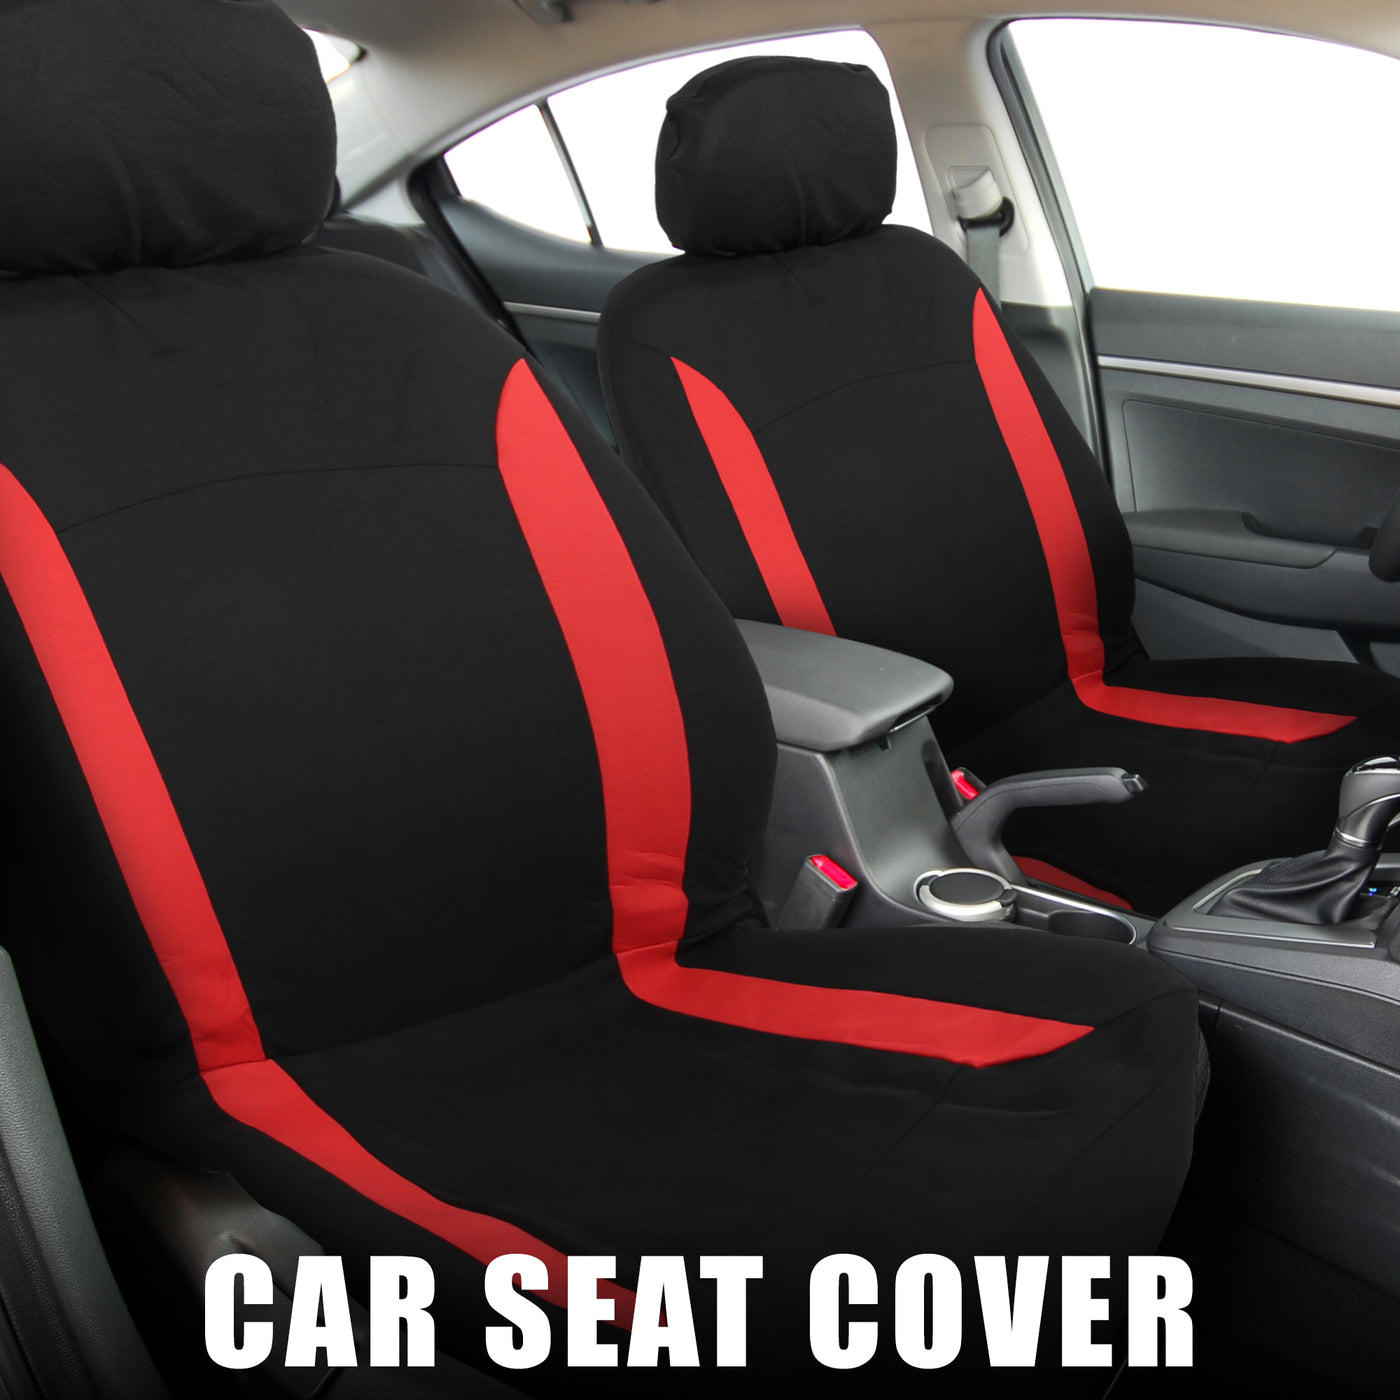 X AUTOHAUX 4pcs Universal Interior Car Seat Covers Head Rest Cover Washable Flat Padding Polyester Sponge Car Seat Covers Fit for Cars Trucks and SUVs